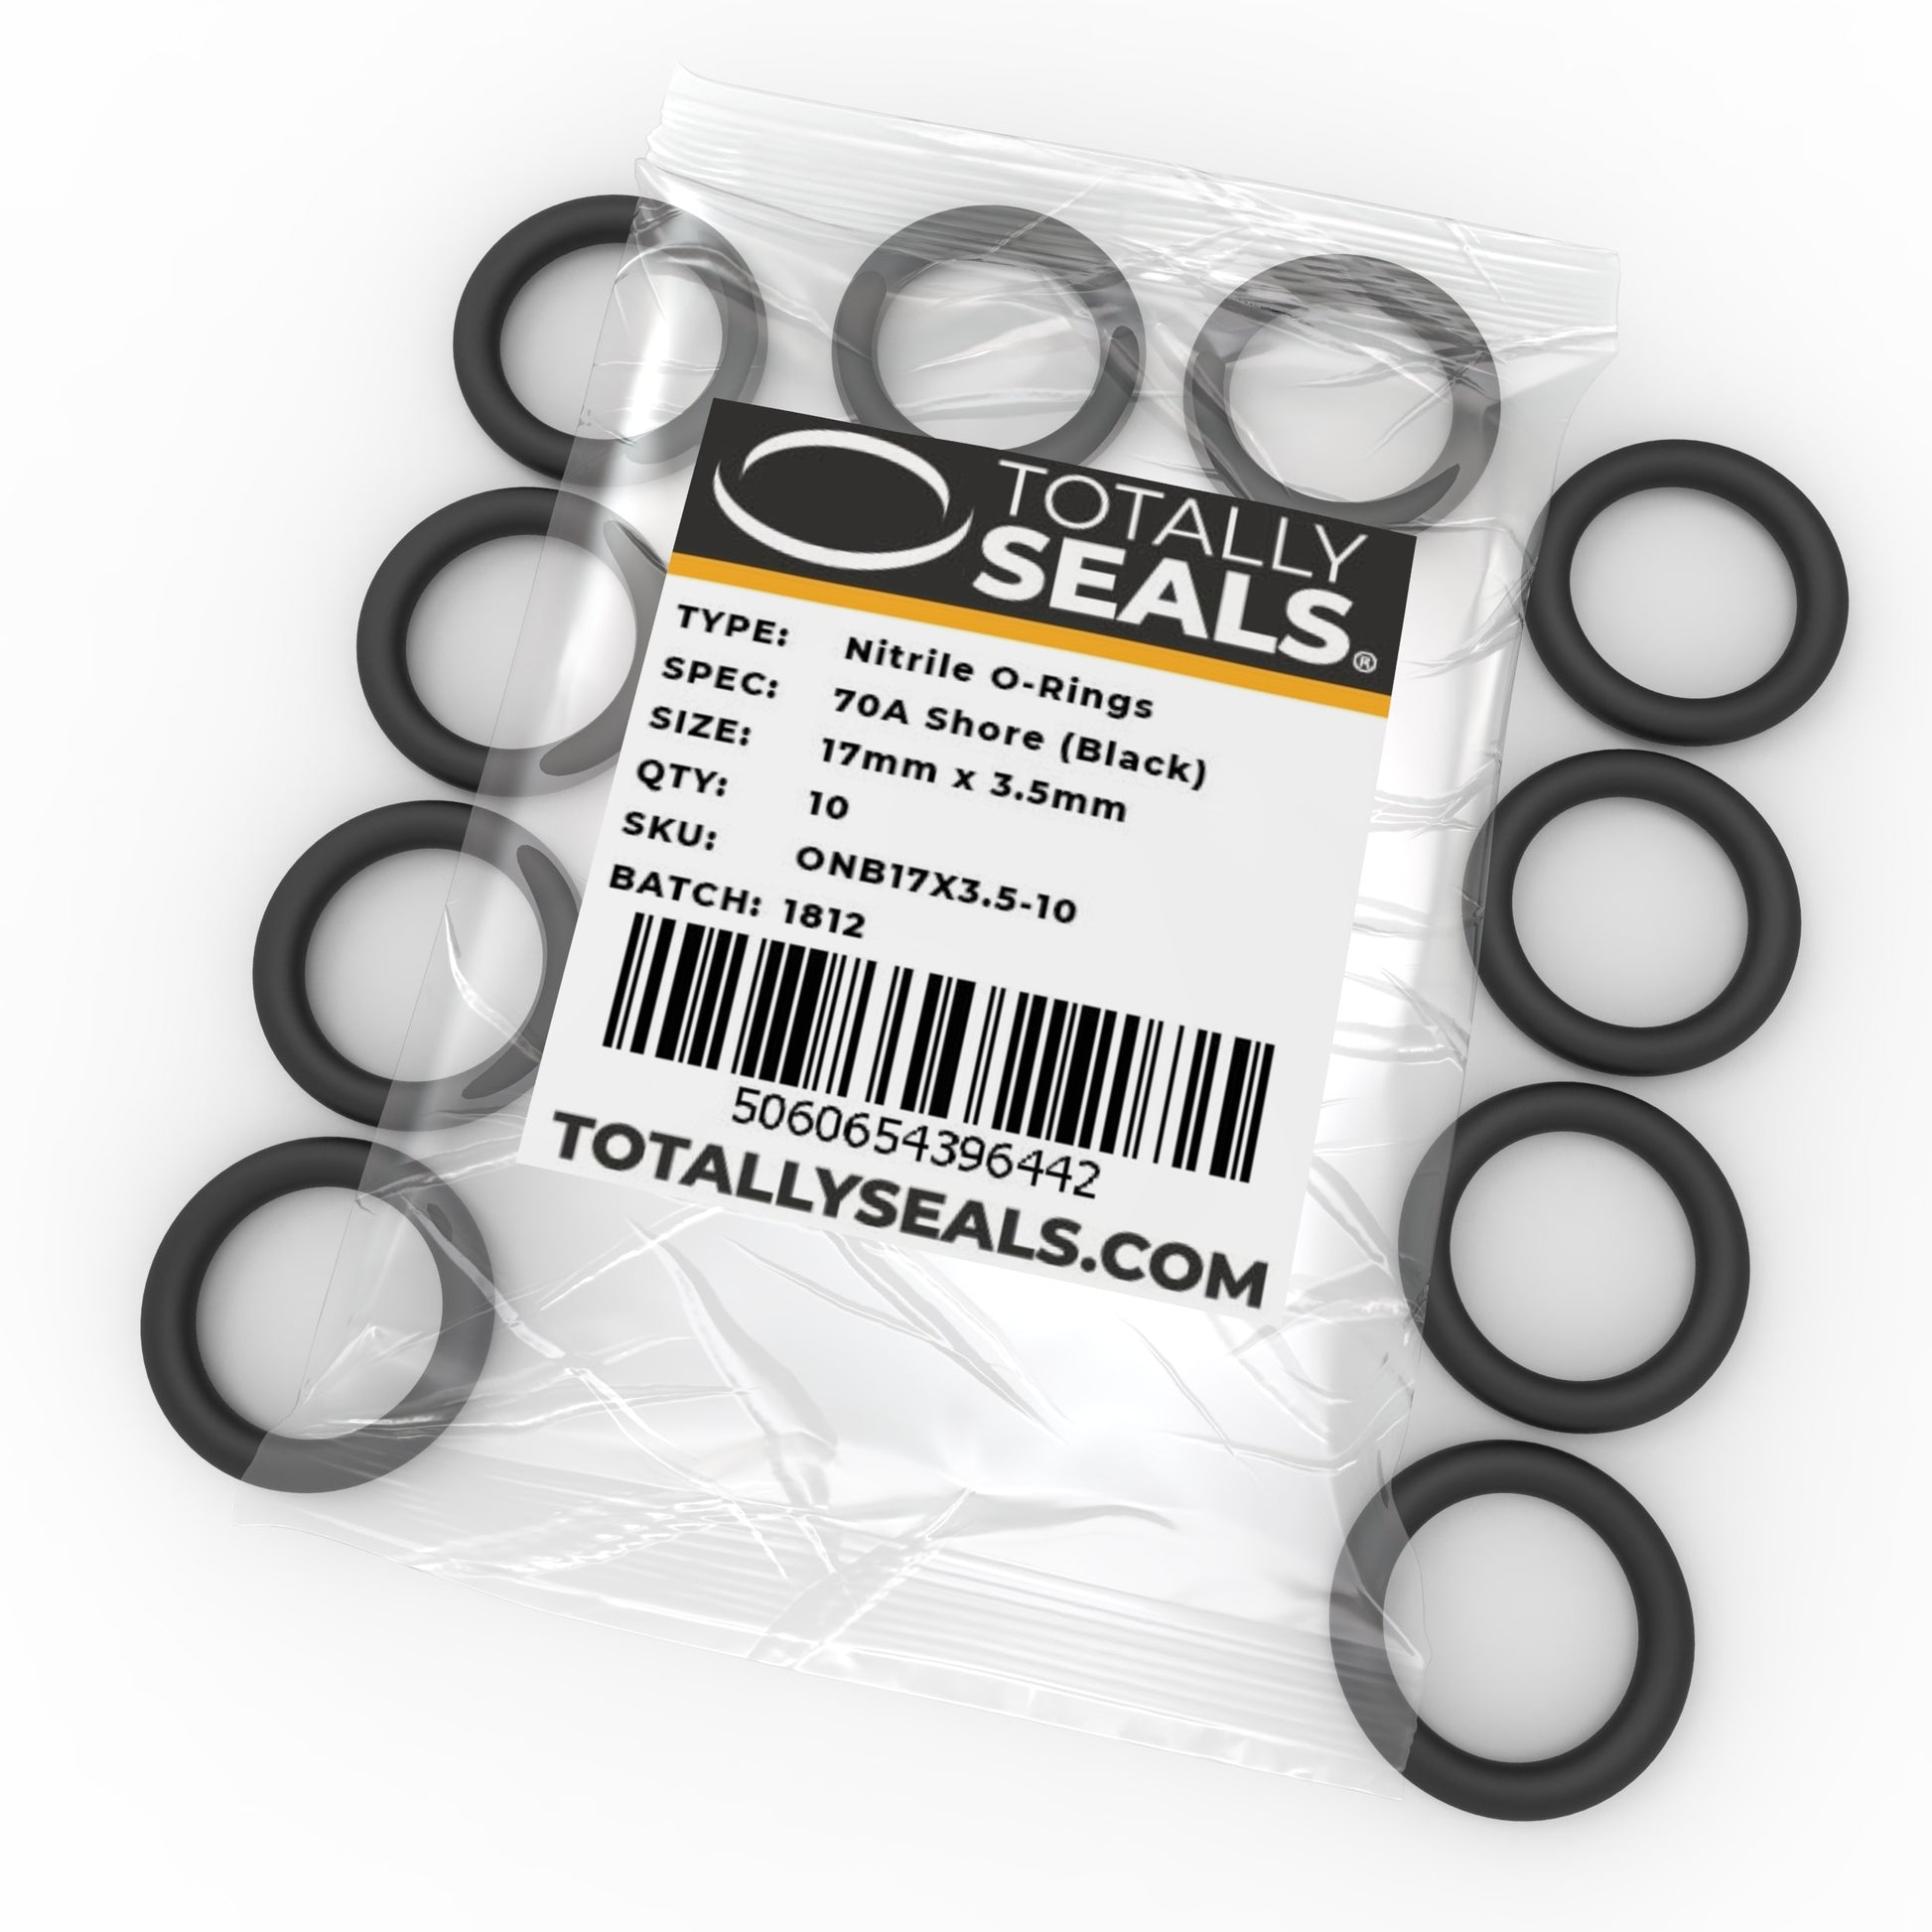 17mm x 3.5mm (24mm OD) Nitrile O-Rings - Totally Seals®